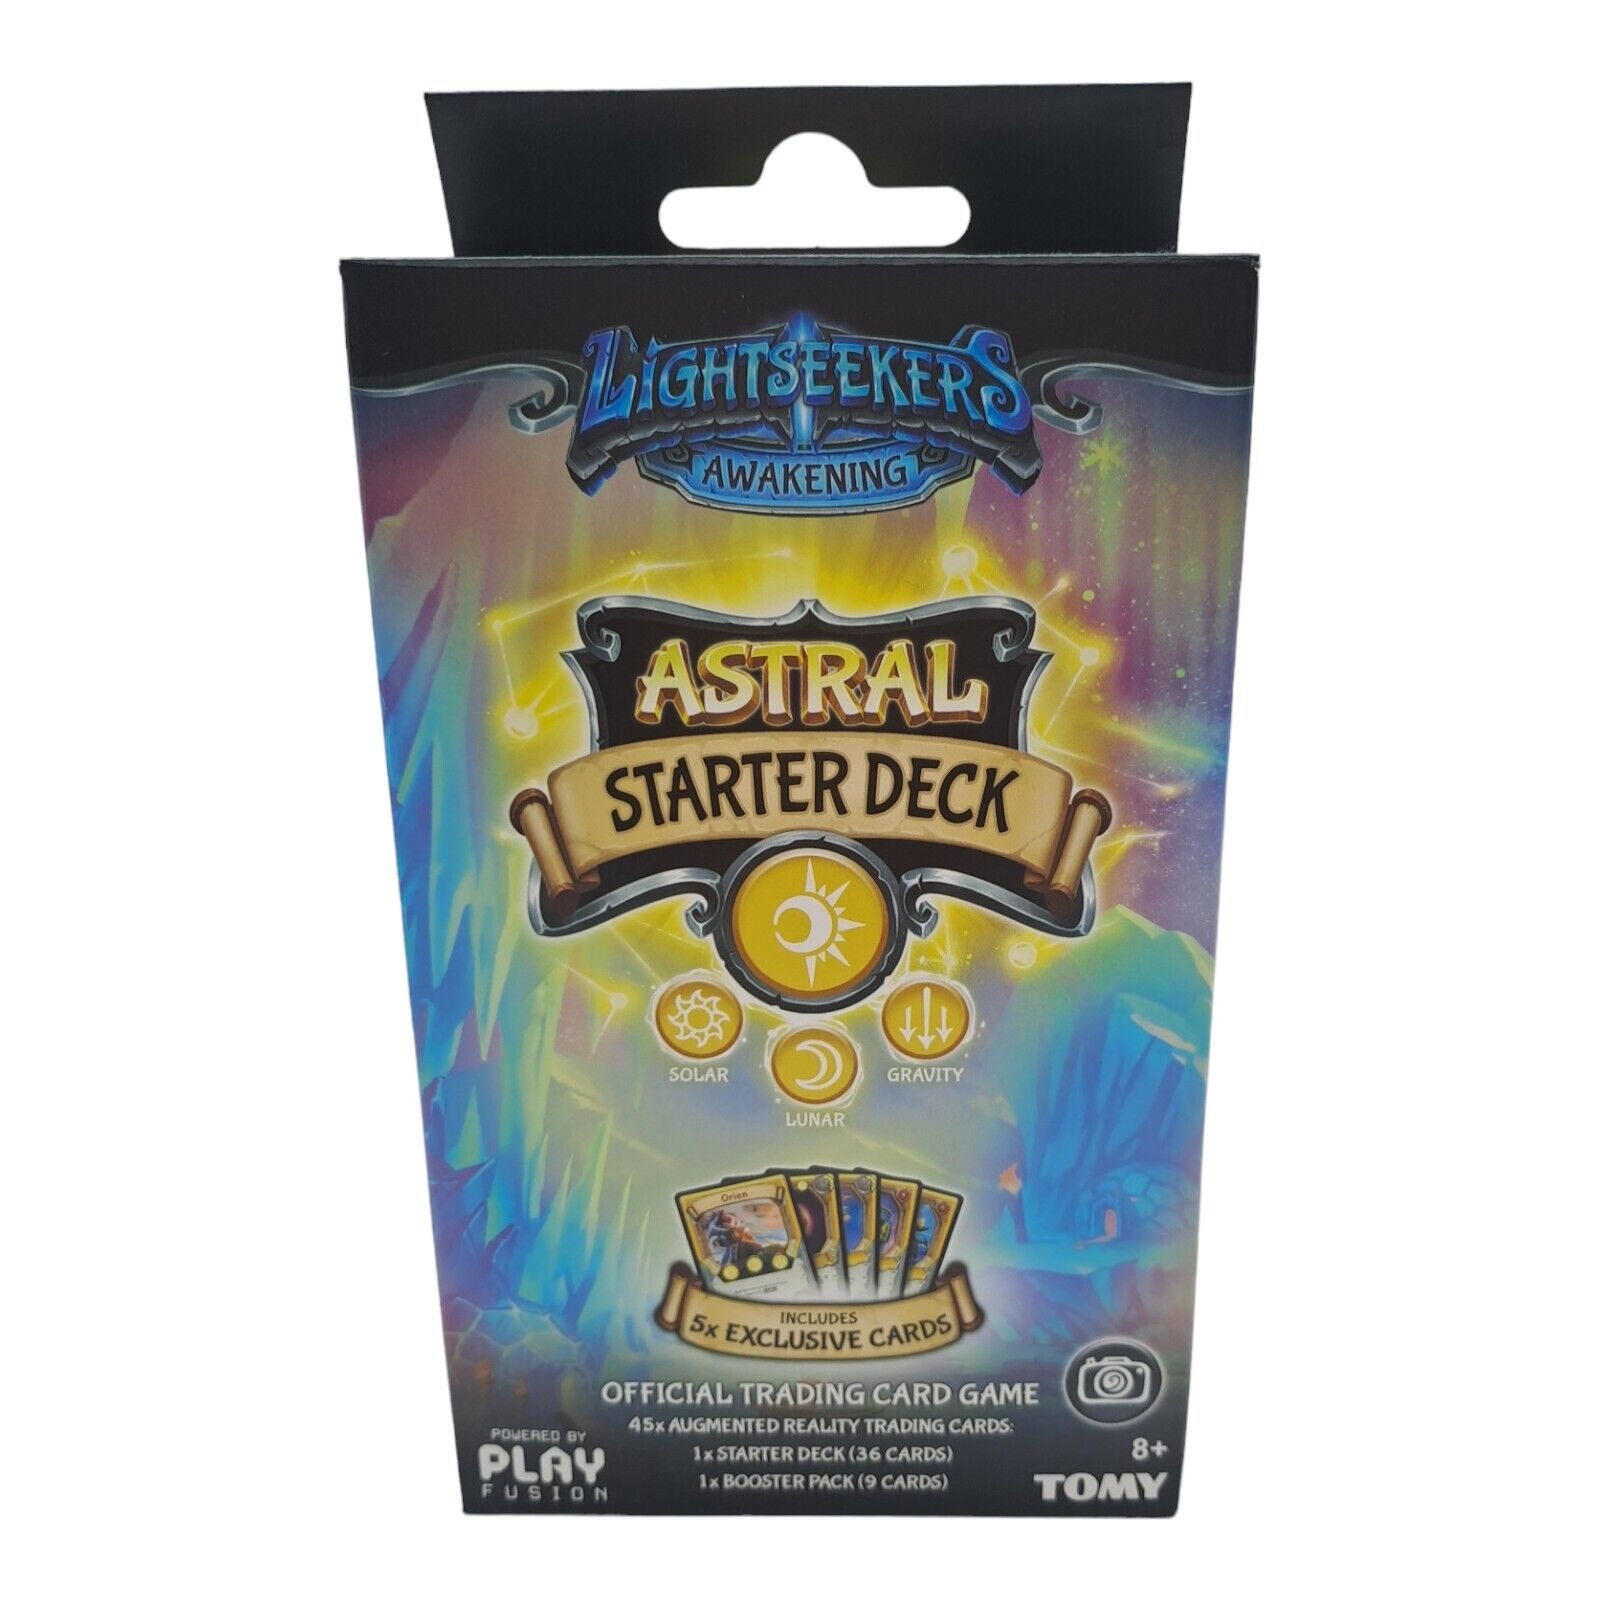 Lightseekers Awakening ASTRAL Starter Deck New Sealed From Play Fusion 8+